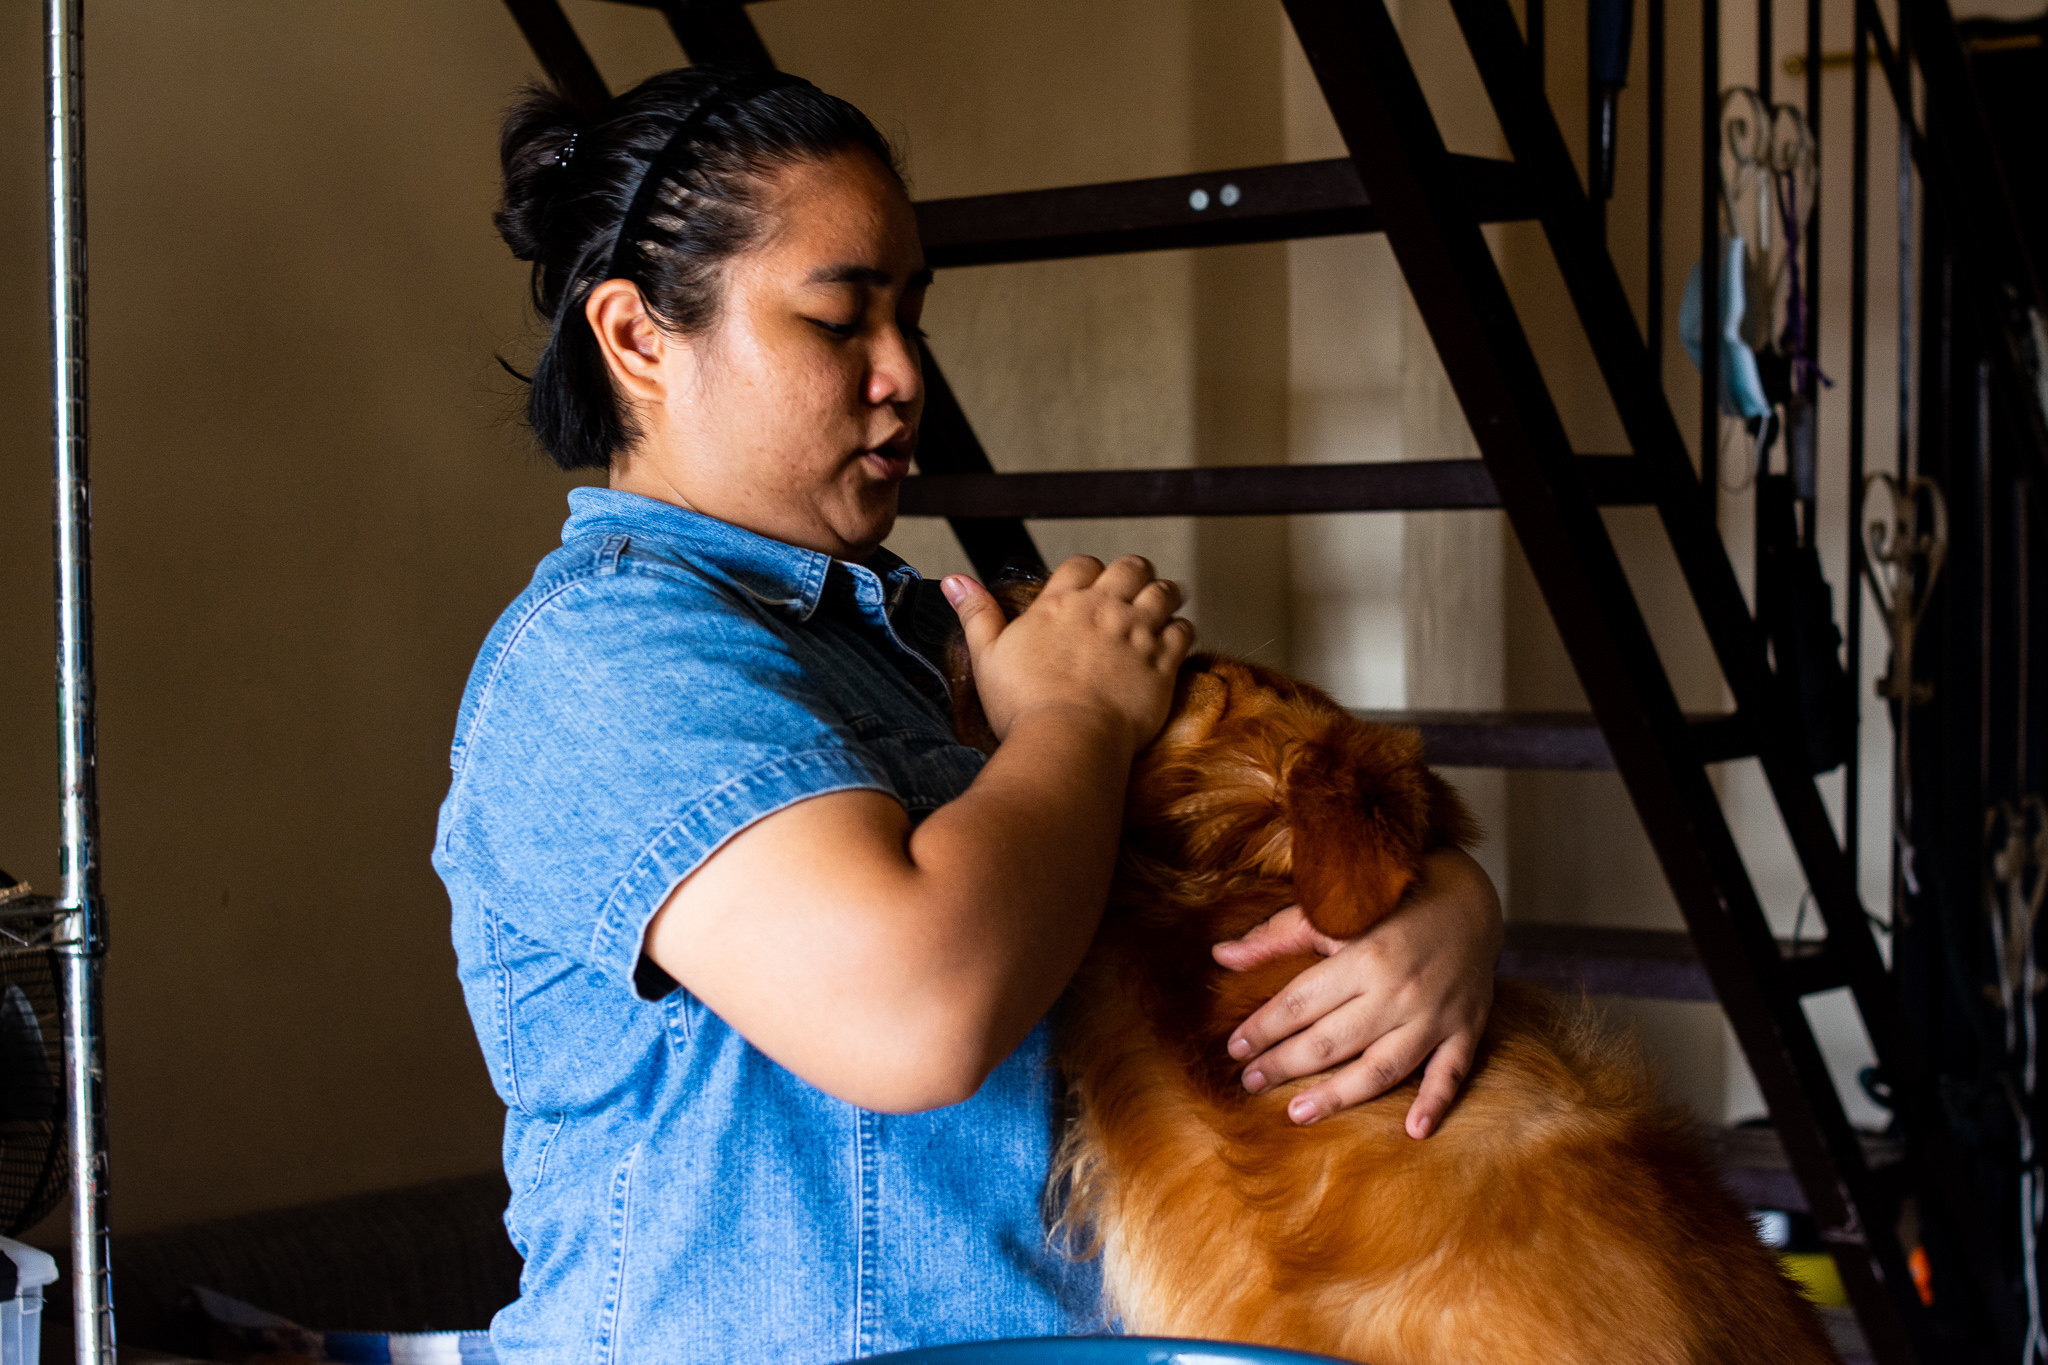 A whimpering Koko is being comforted by Majann, after the golden retriever spit out his medicine. Photo: Maro Enriquez